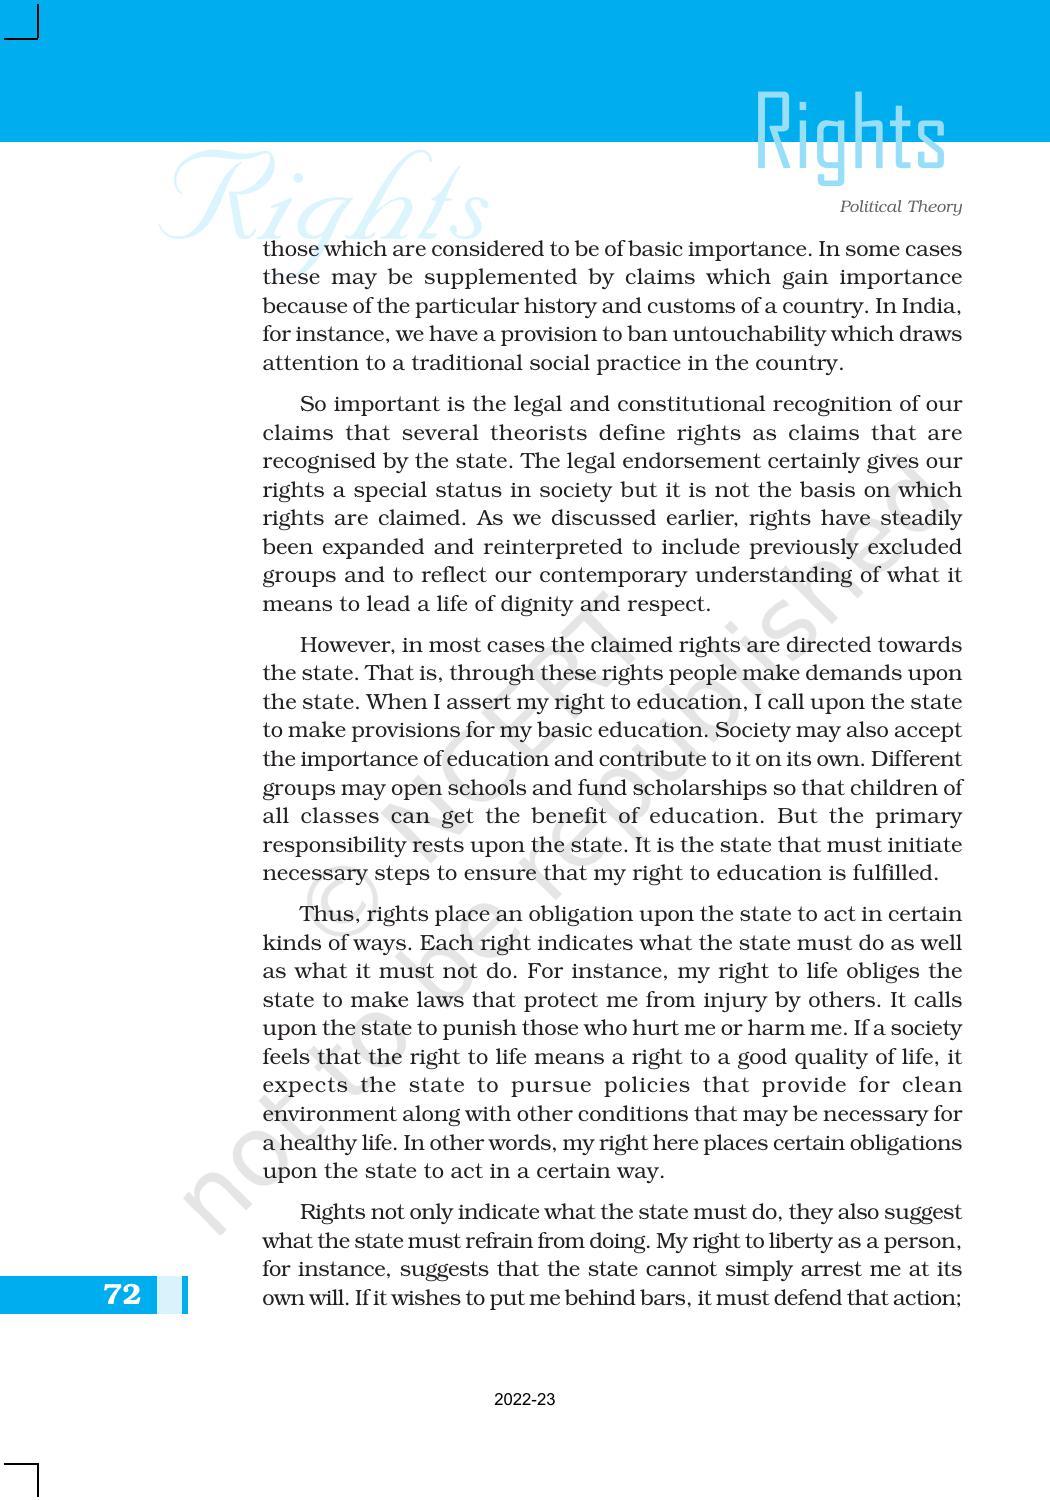 NCERT Book for Class 11 Political Science (Political Theory) Chapter 5 Rights - Page 6